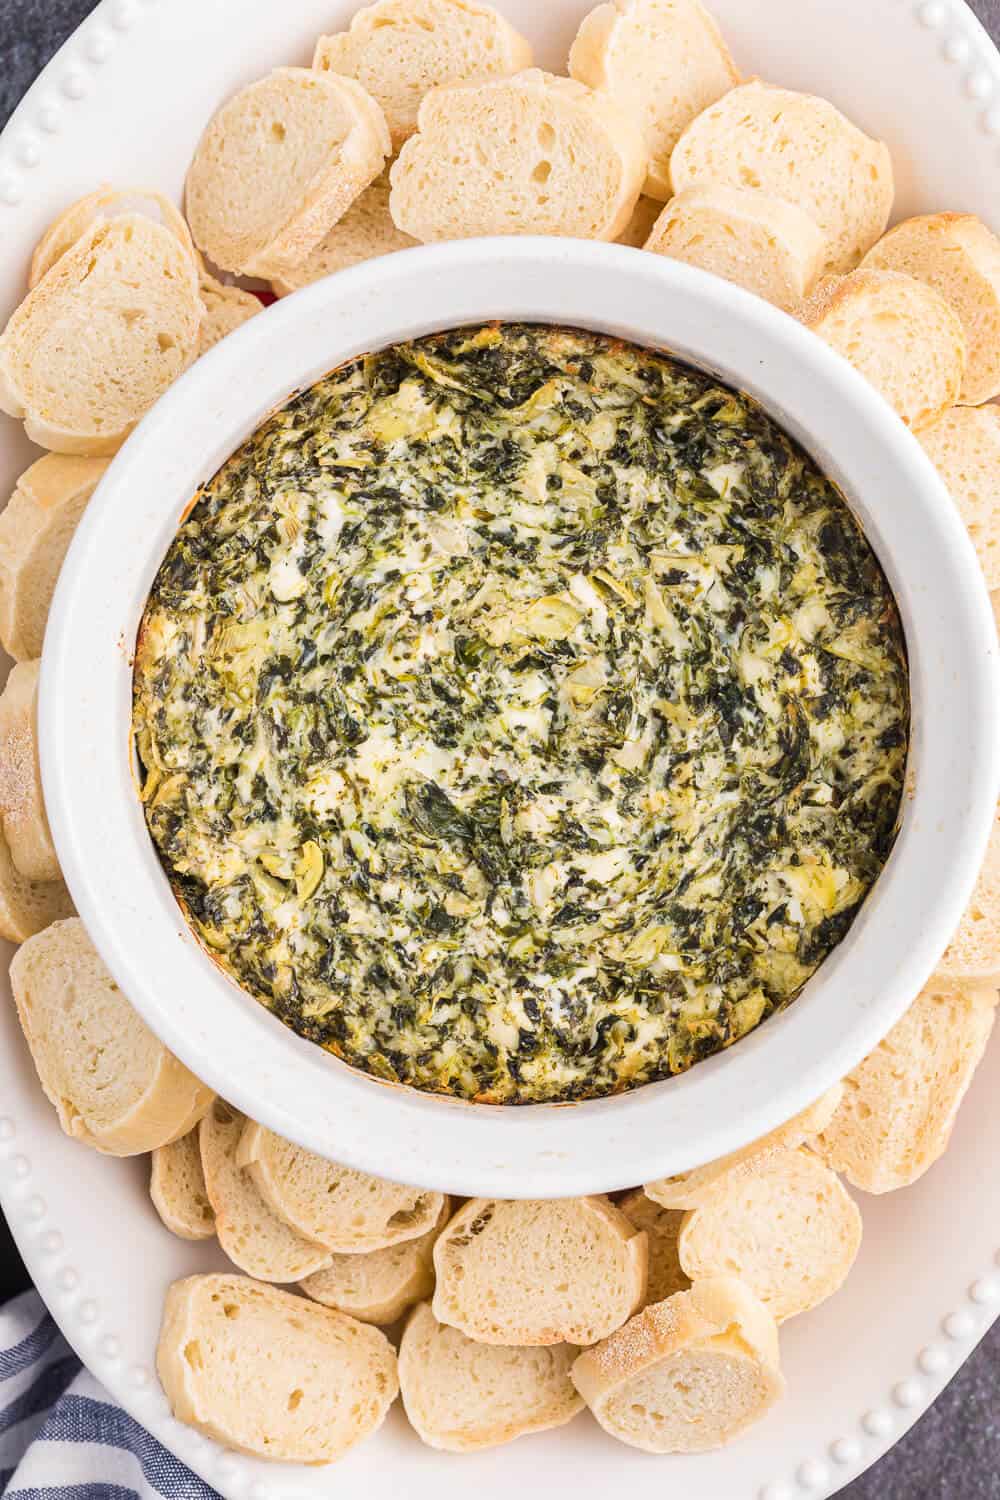 A bowl of spinach artichoke dip with slices of baguette.